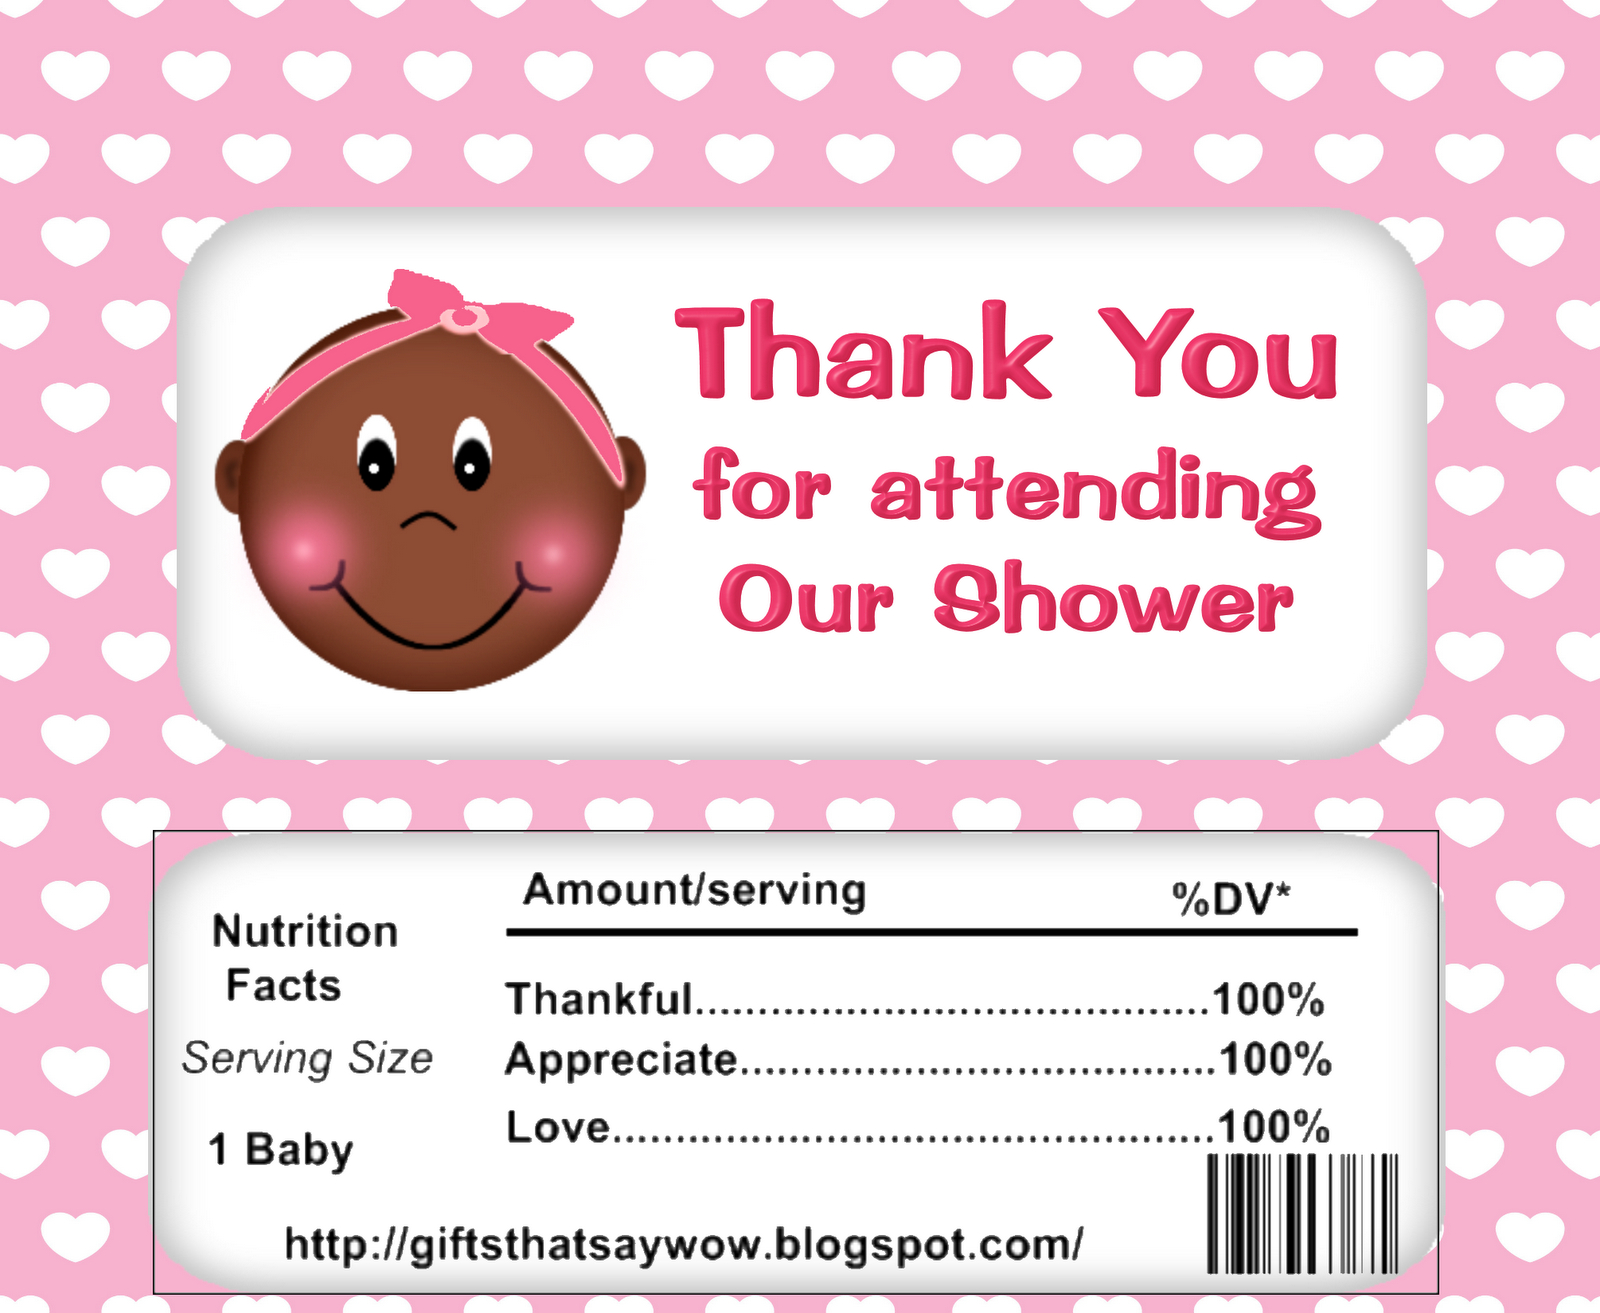 Gifts That Say Wow: Free Printable African American Baby Shower - Candy Bar Baby Shower Game Free Printable